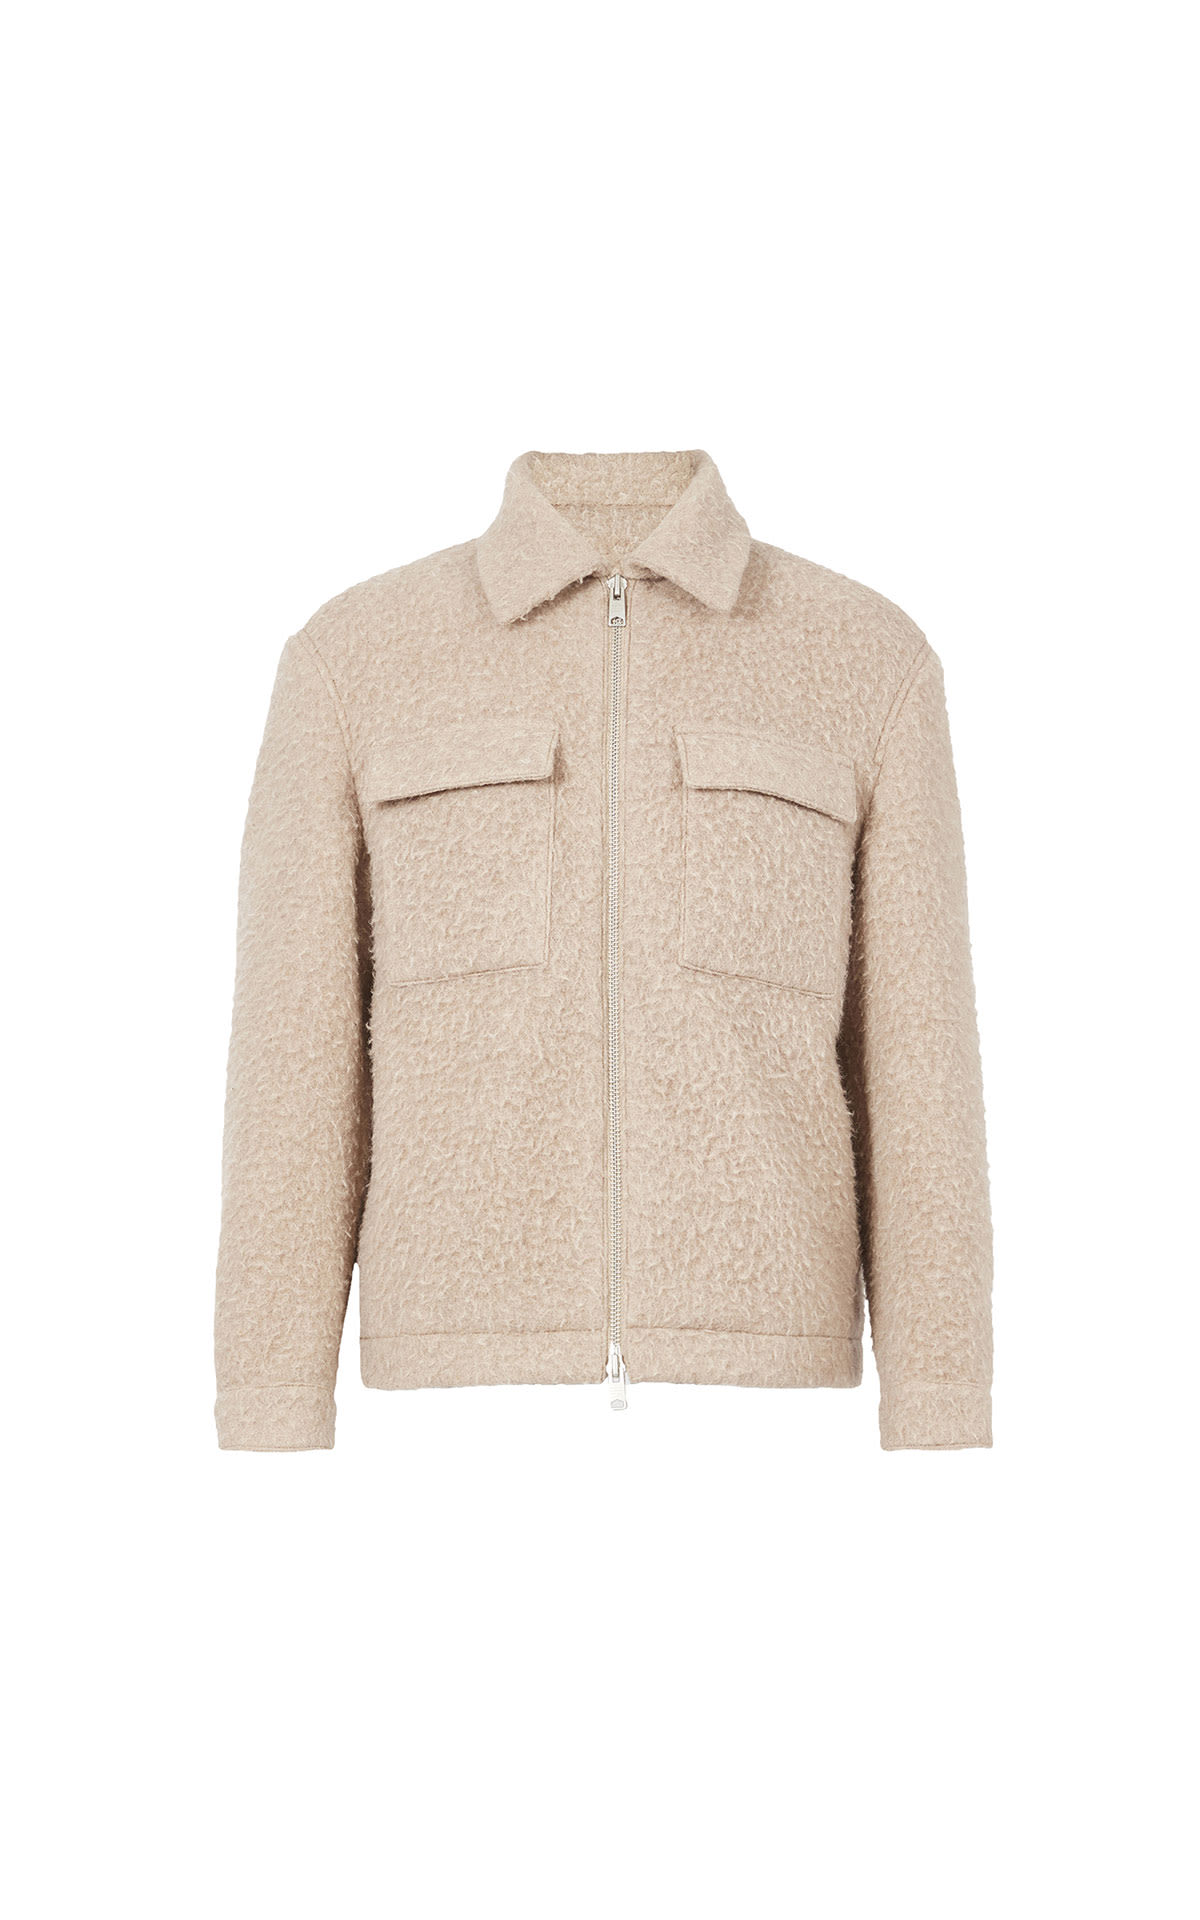 Allsaints Bobby jacket from Bicester Village